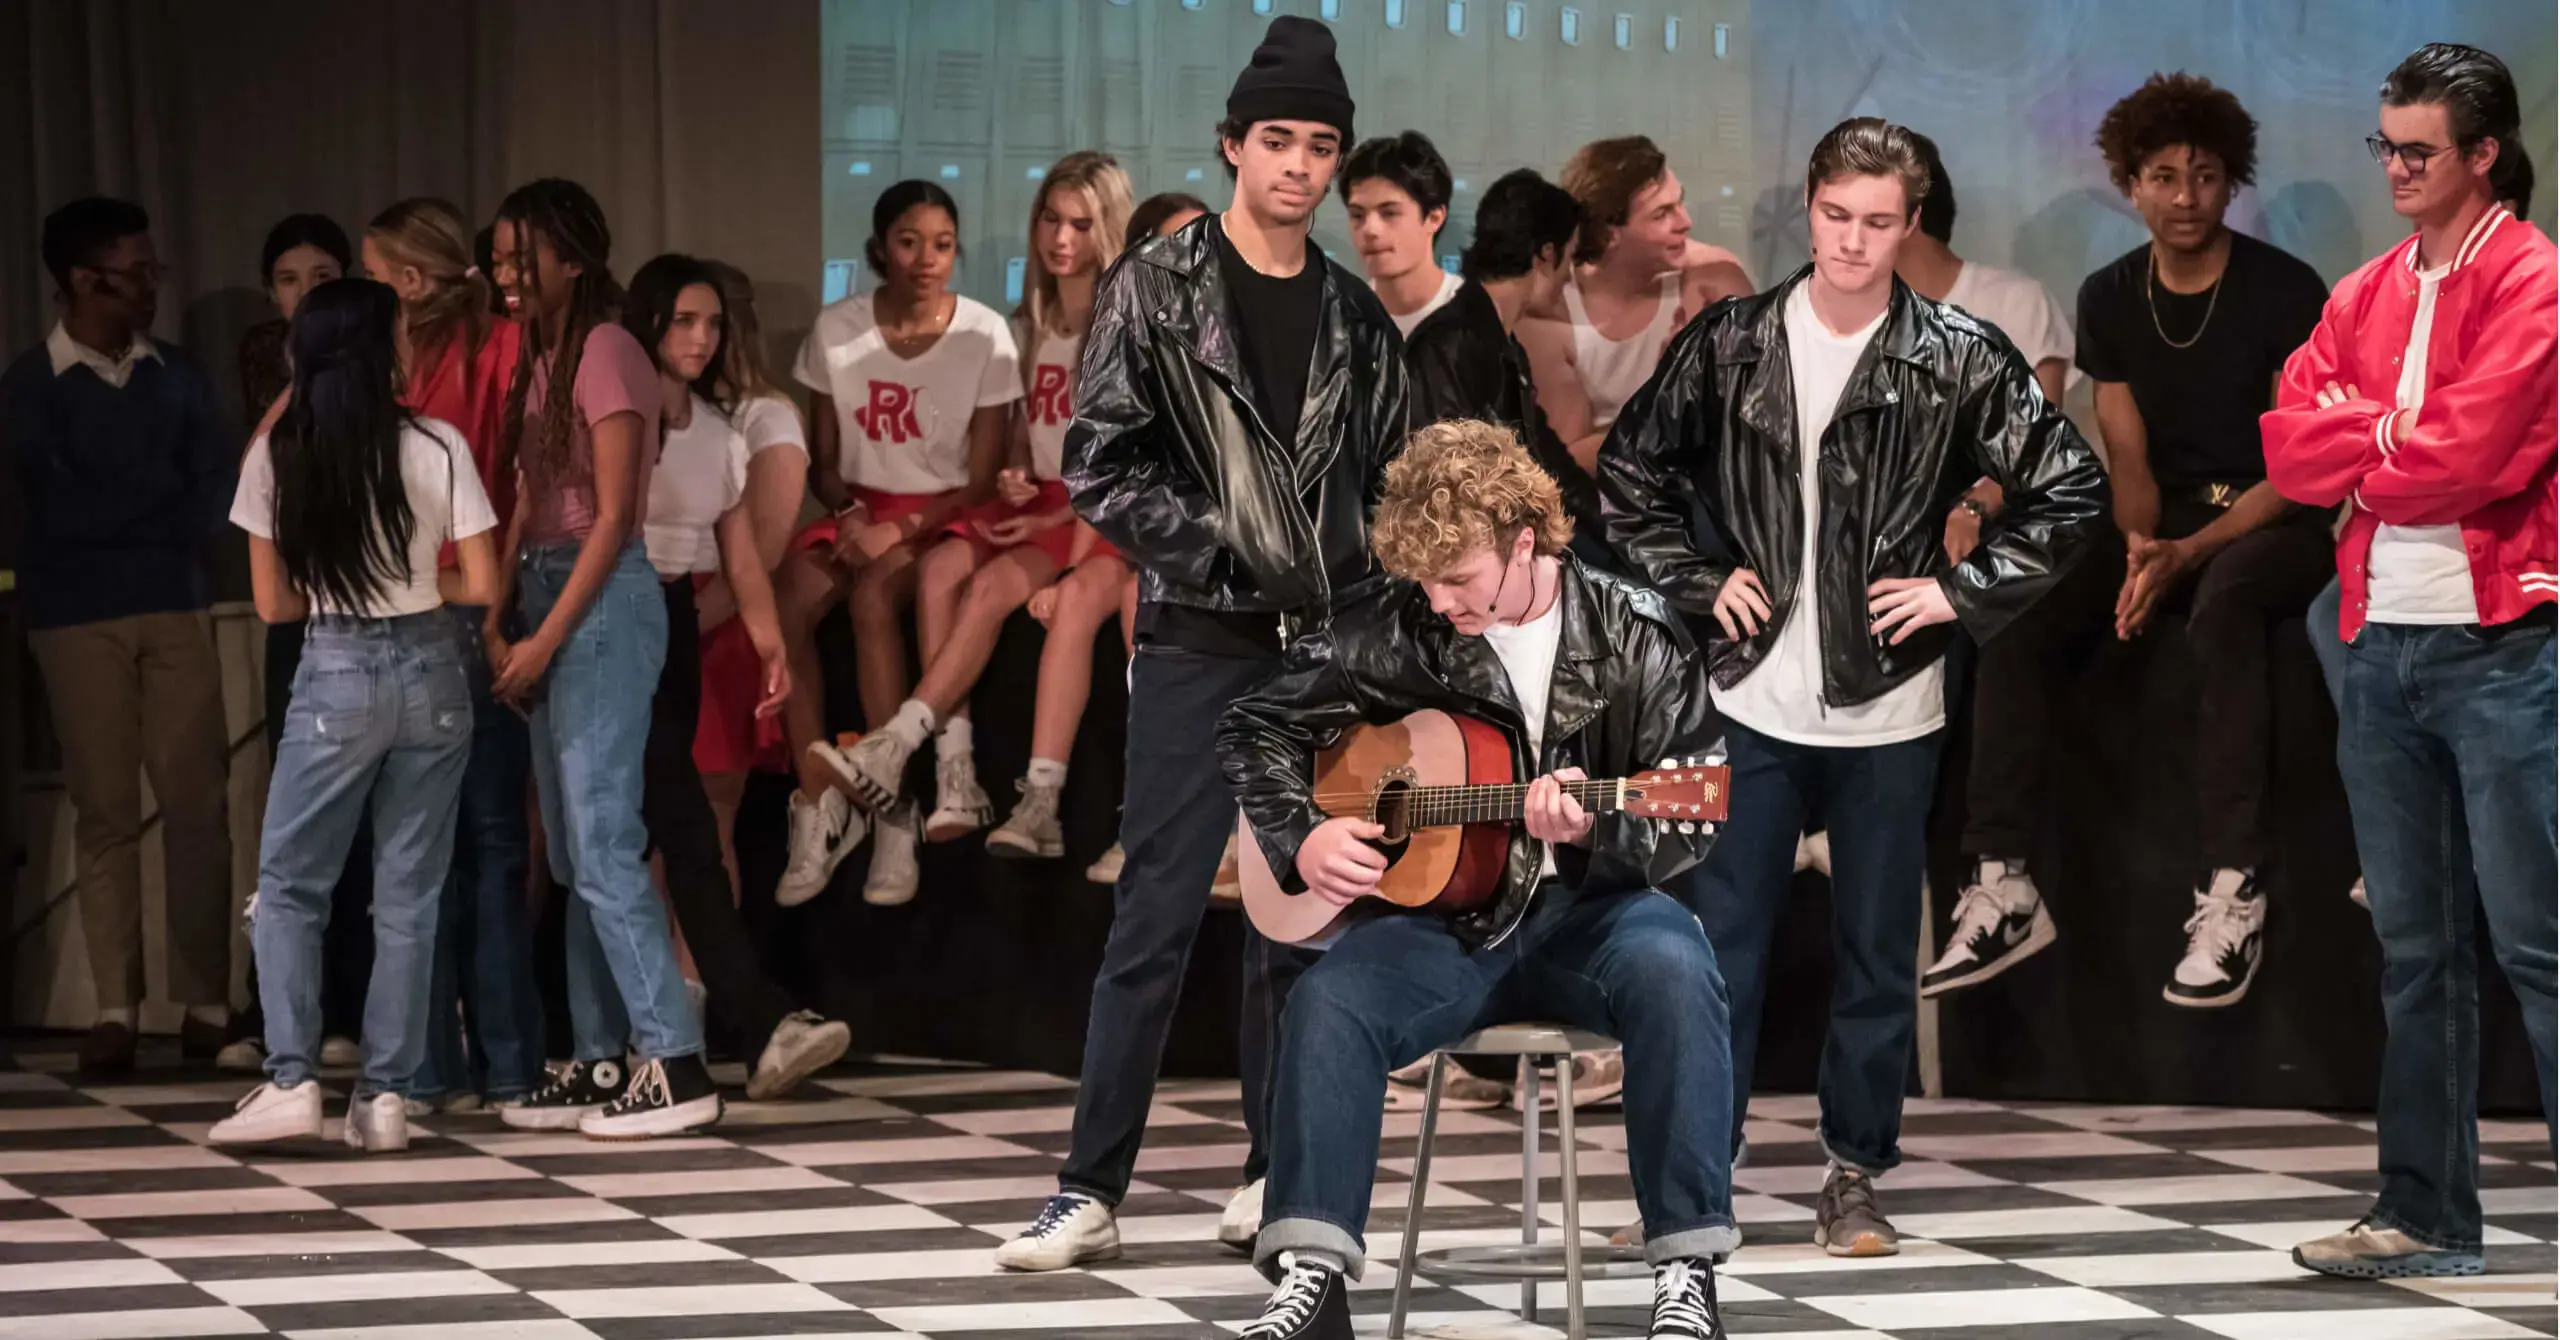 Porter-Gaud students performing Grease